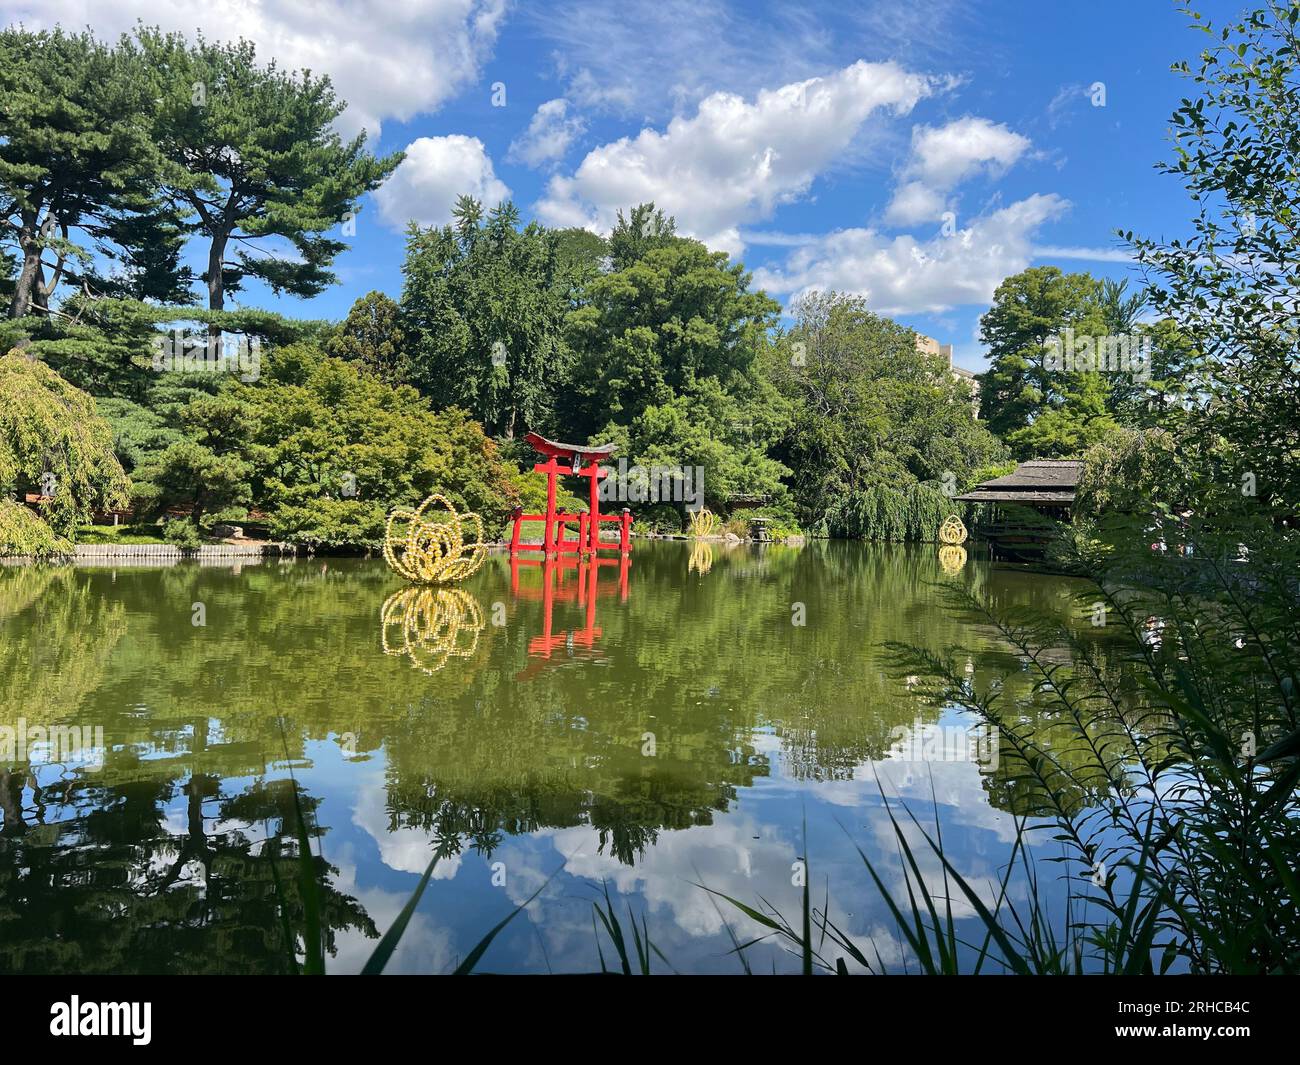 The Flowers of Hypnosis; by French artist Jean-Michel Othoniel presents a new series of six large sculptures at Brooklyn Botanic Garden. Here seen next to the iconic Heaven's Gate in the pond of the Japanese Garden. Stock Photo